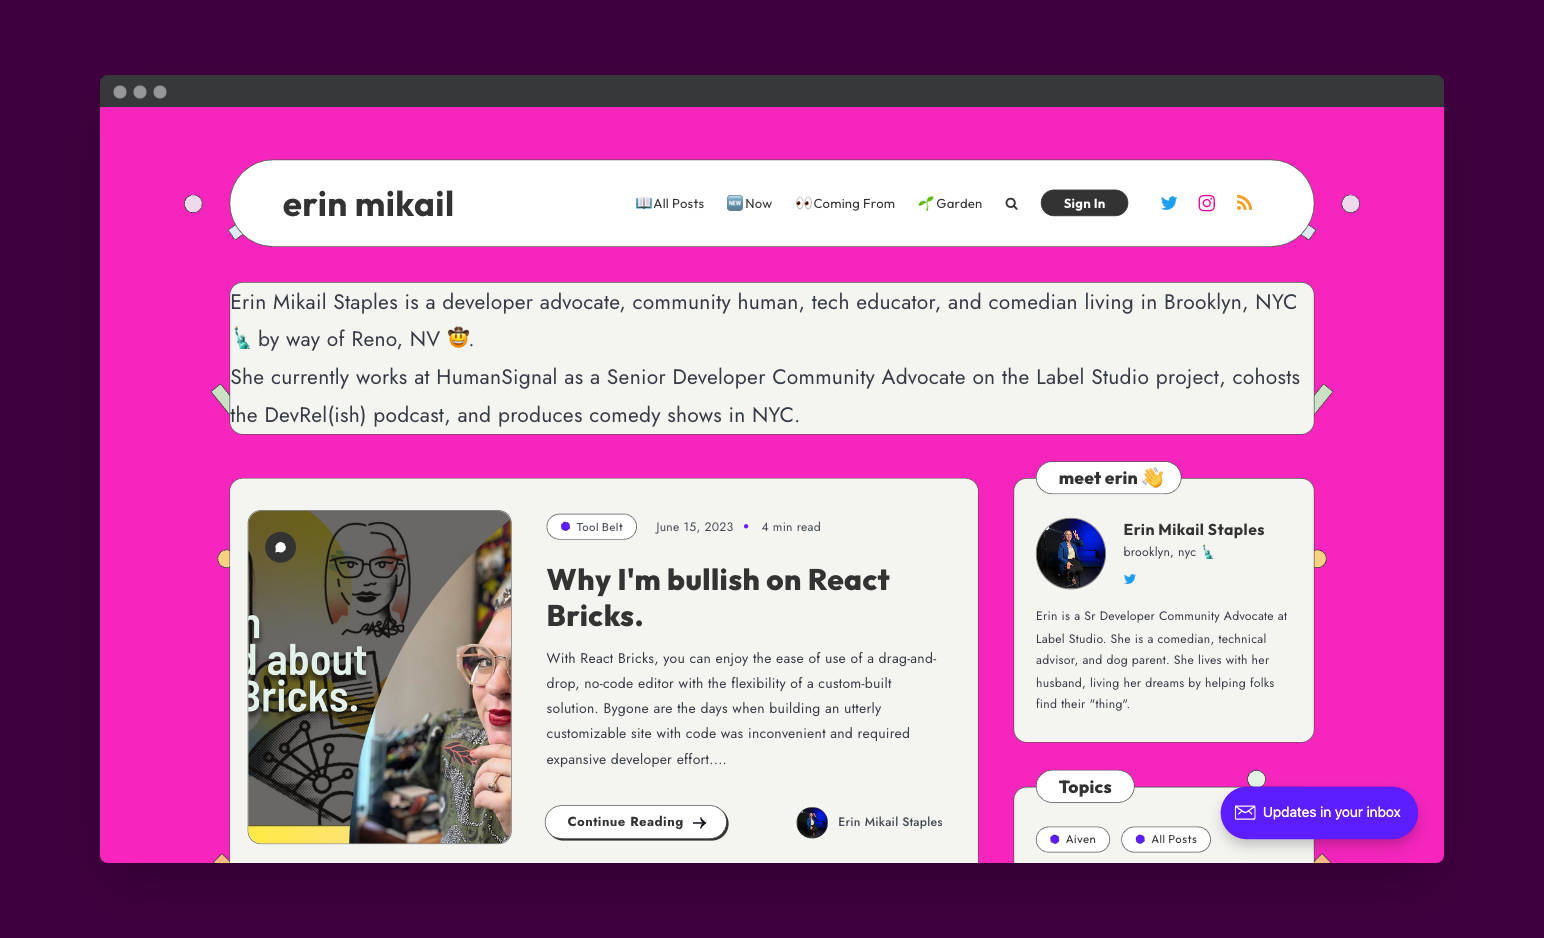 Erin Mikail's personal website with a bright pink background and cards with posts, twitter info, description, and more